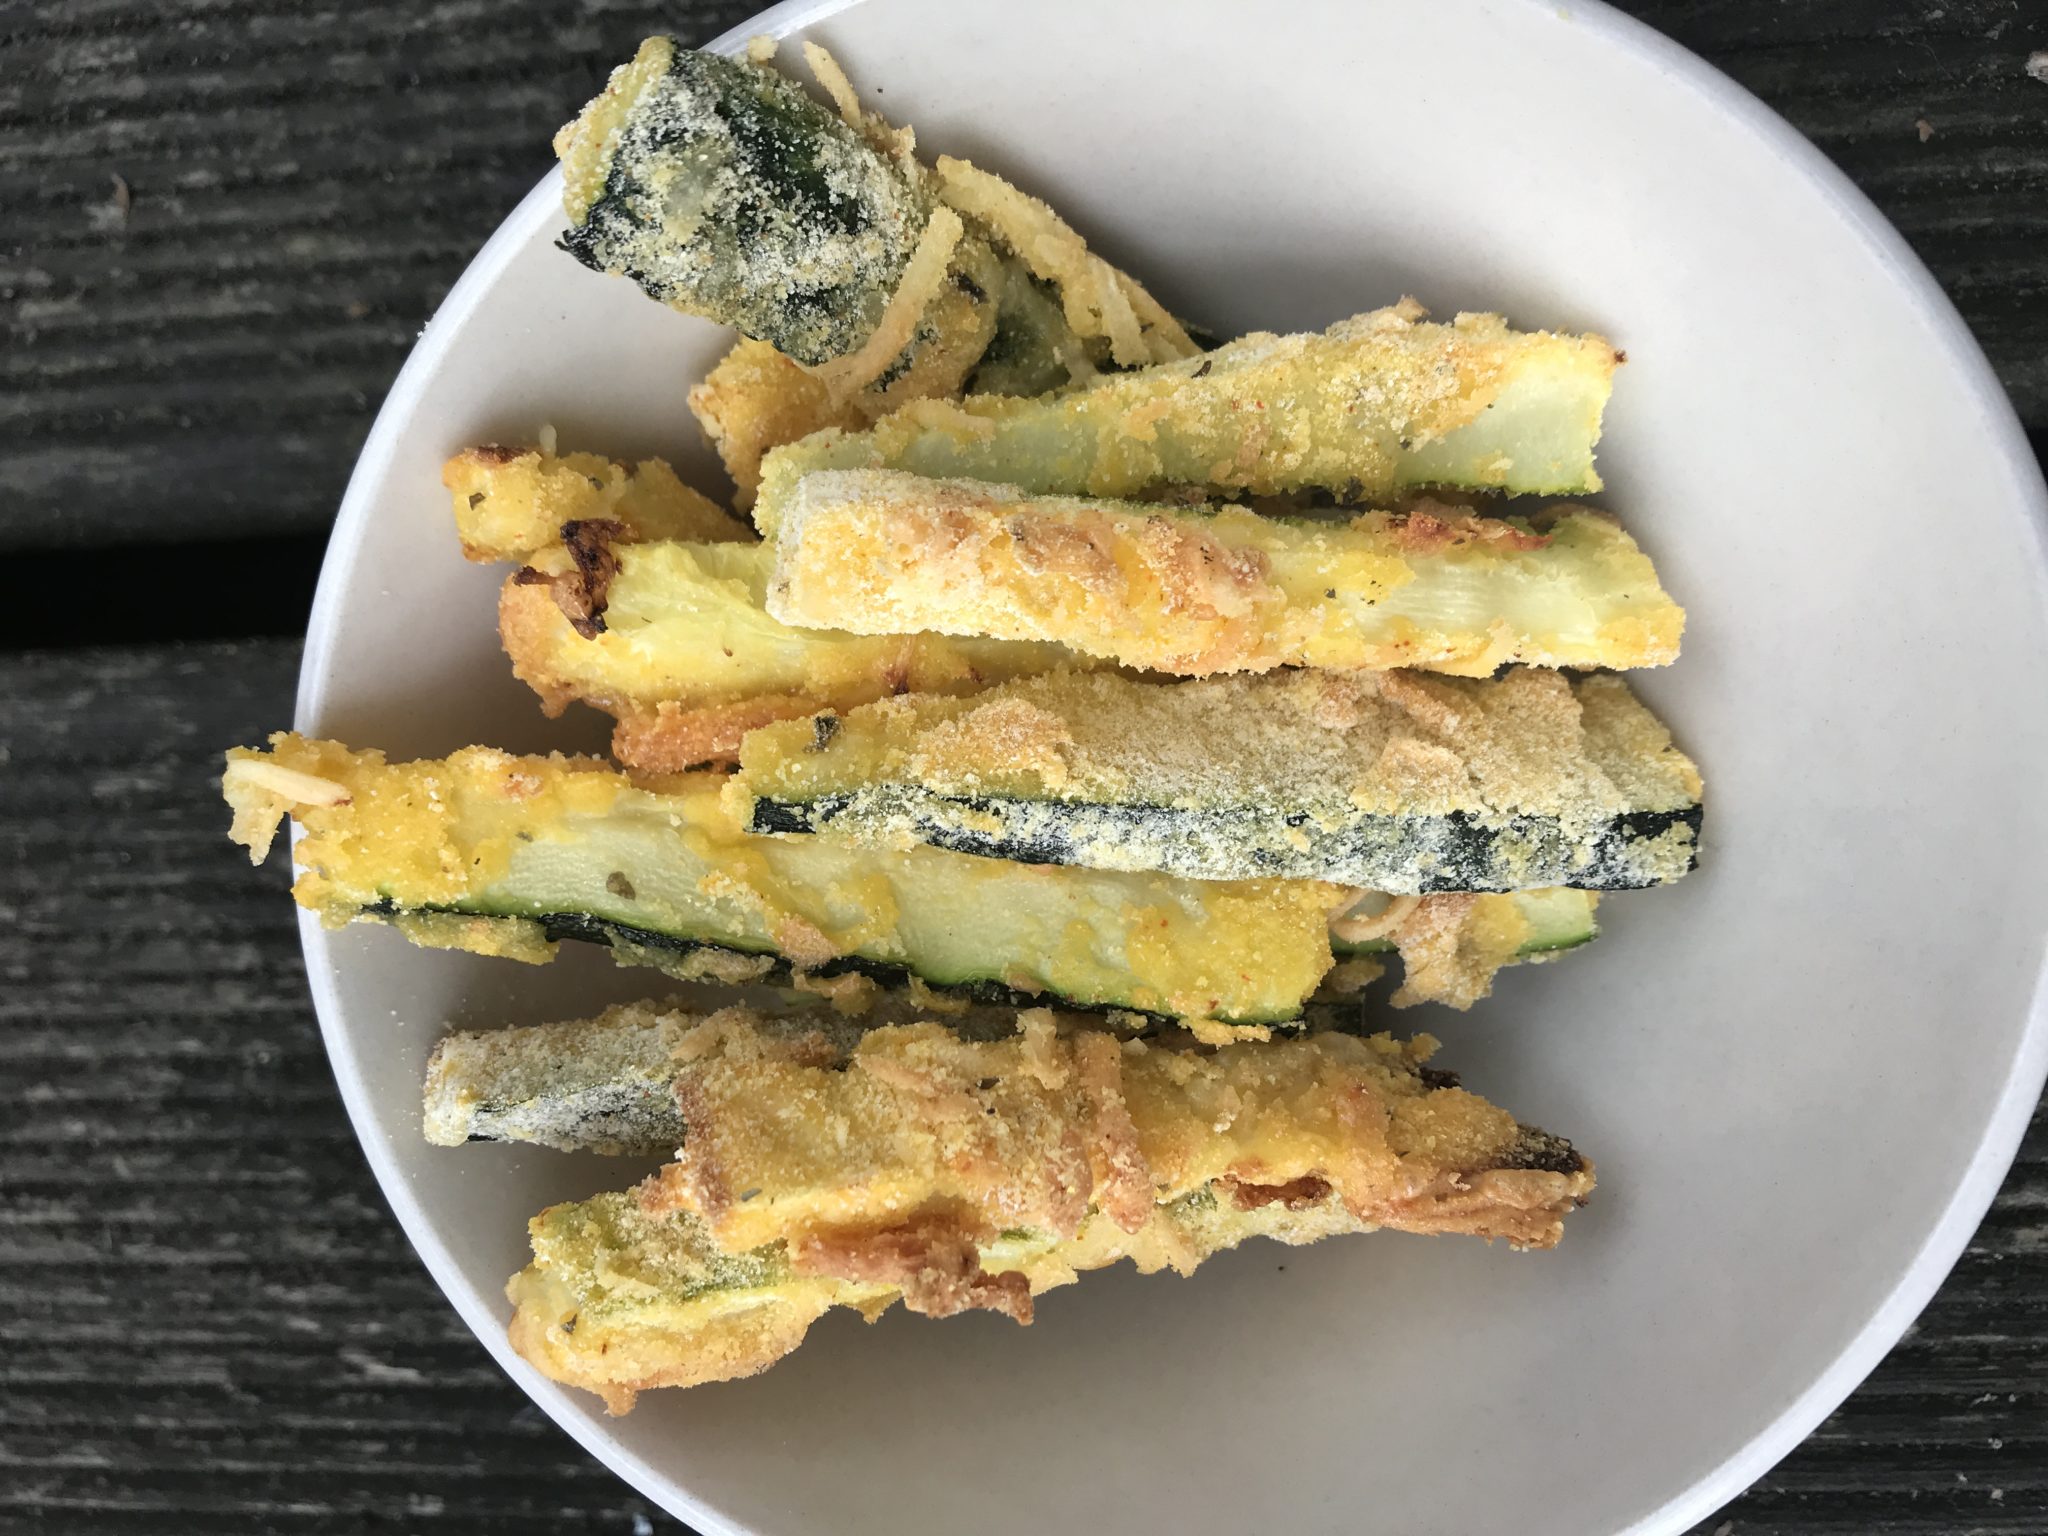 Courgette Recipes